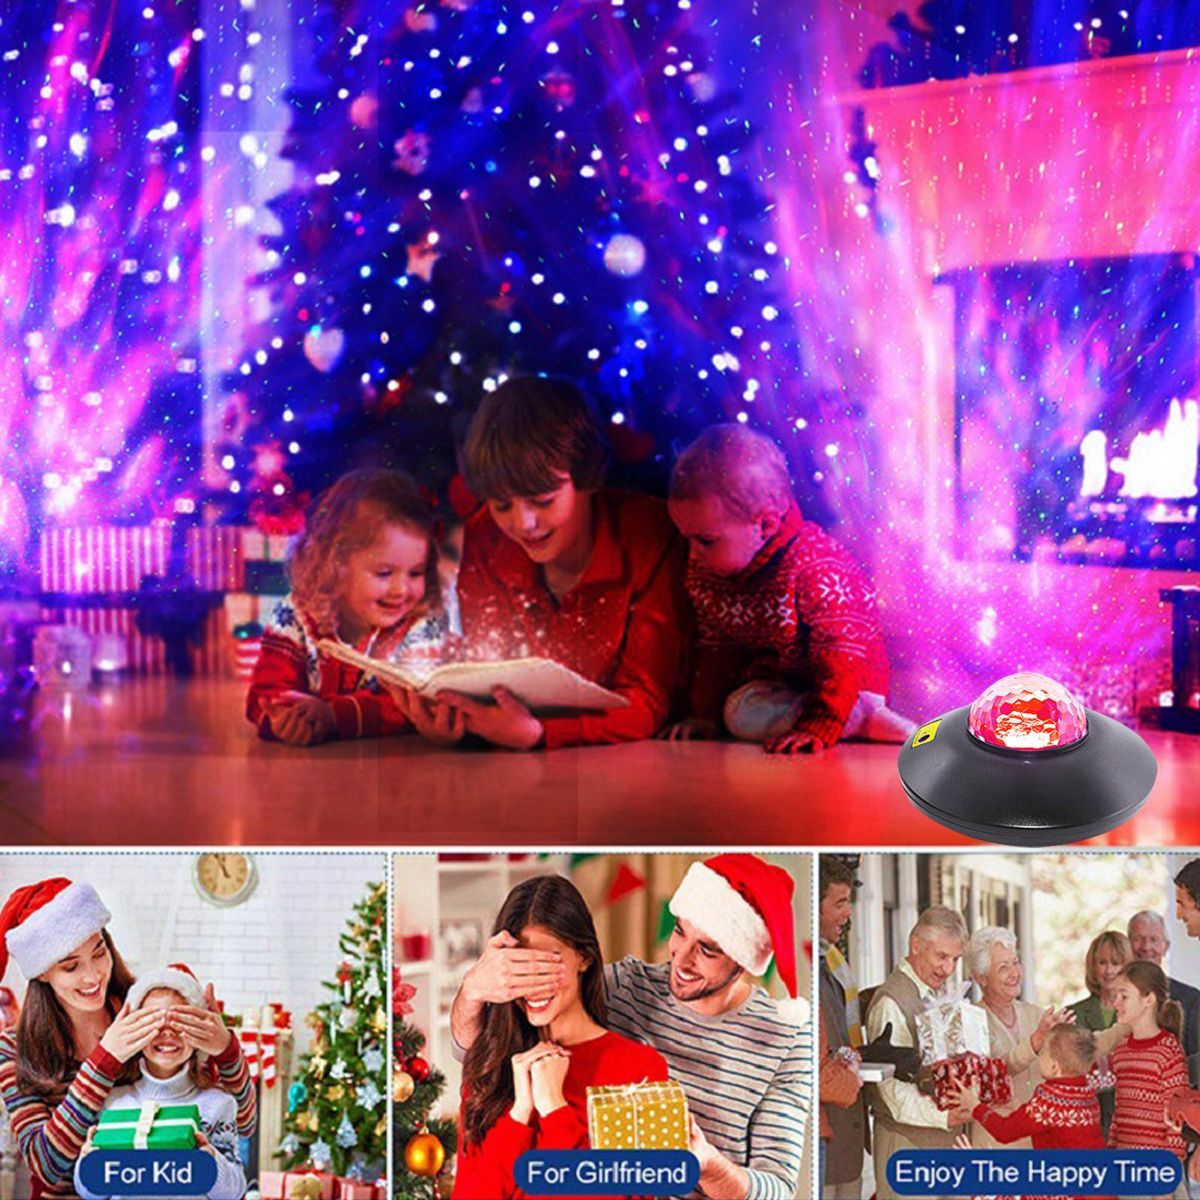 USB-LED-Laser-Projector-bluetooth-Speaker-Lamp-Galaxy-Starry-Night-Light-Christmas-Party-Lights-Gift-1753804